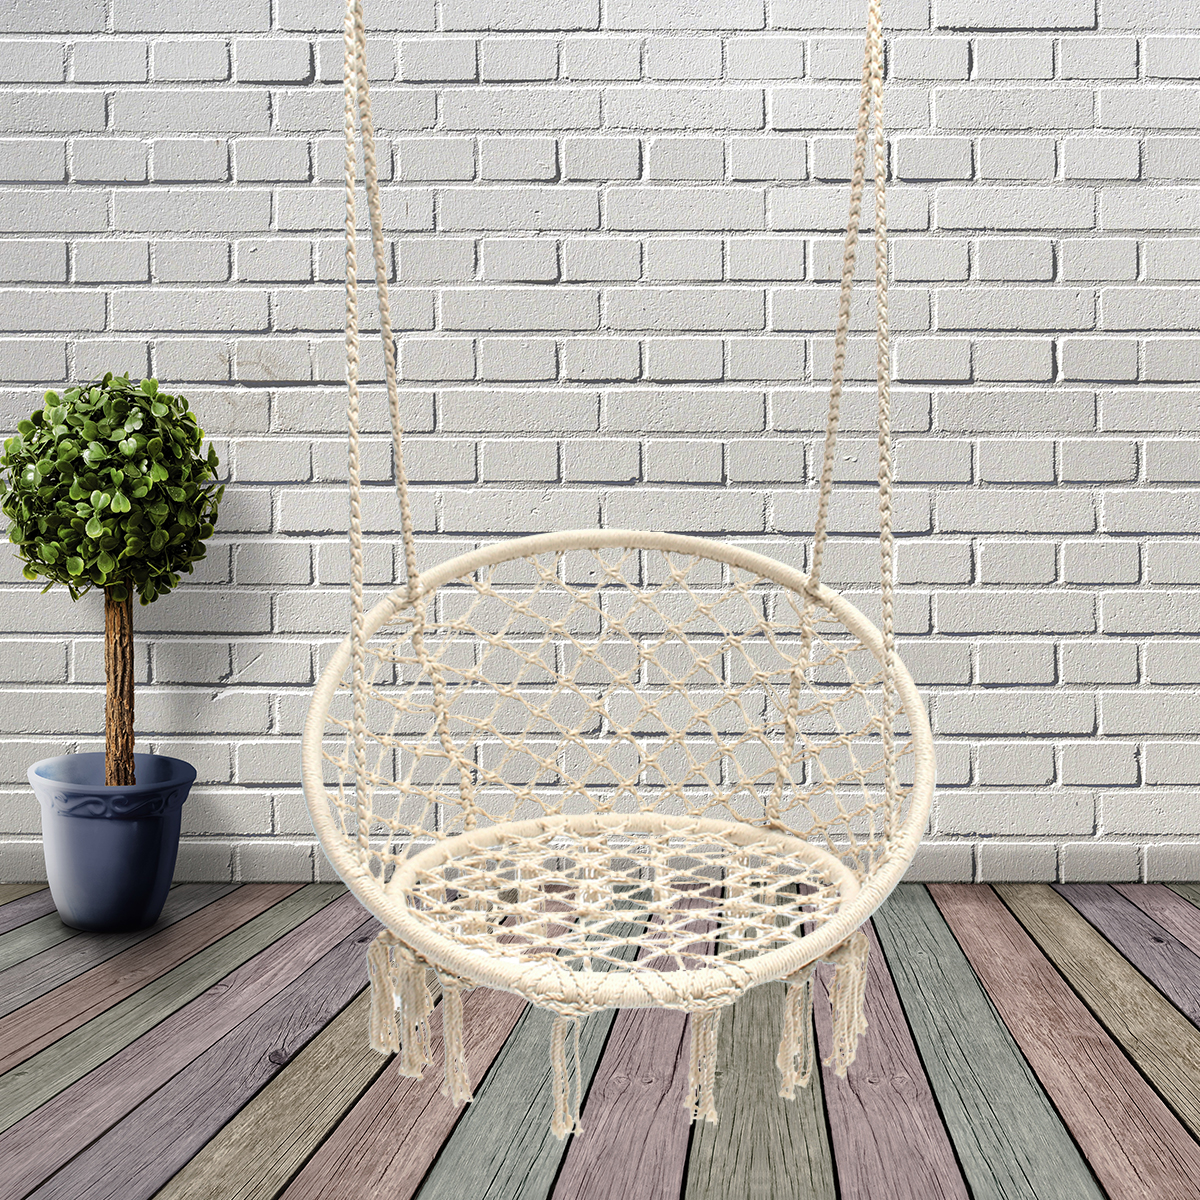 Outdoor Hanging Swing Cotton Hammock Chair Solid Mesh Woven Rope Yard Patio Porch Garden Wooden Bar Chair Swing Patio Chair With Install Tool Home Decor Gift - image 1 of 8